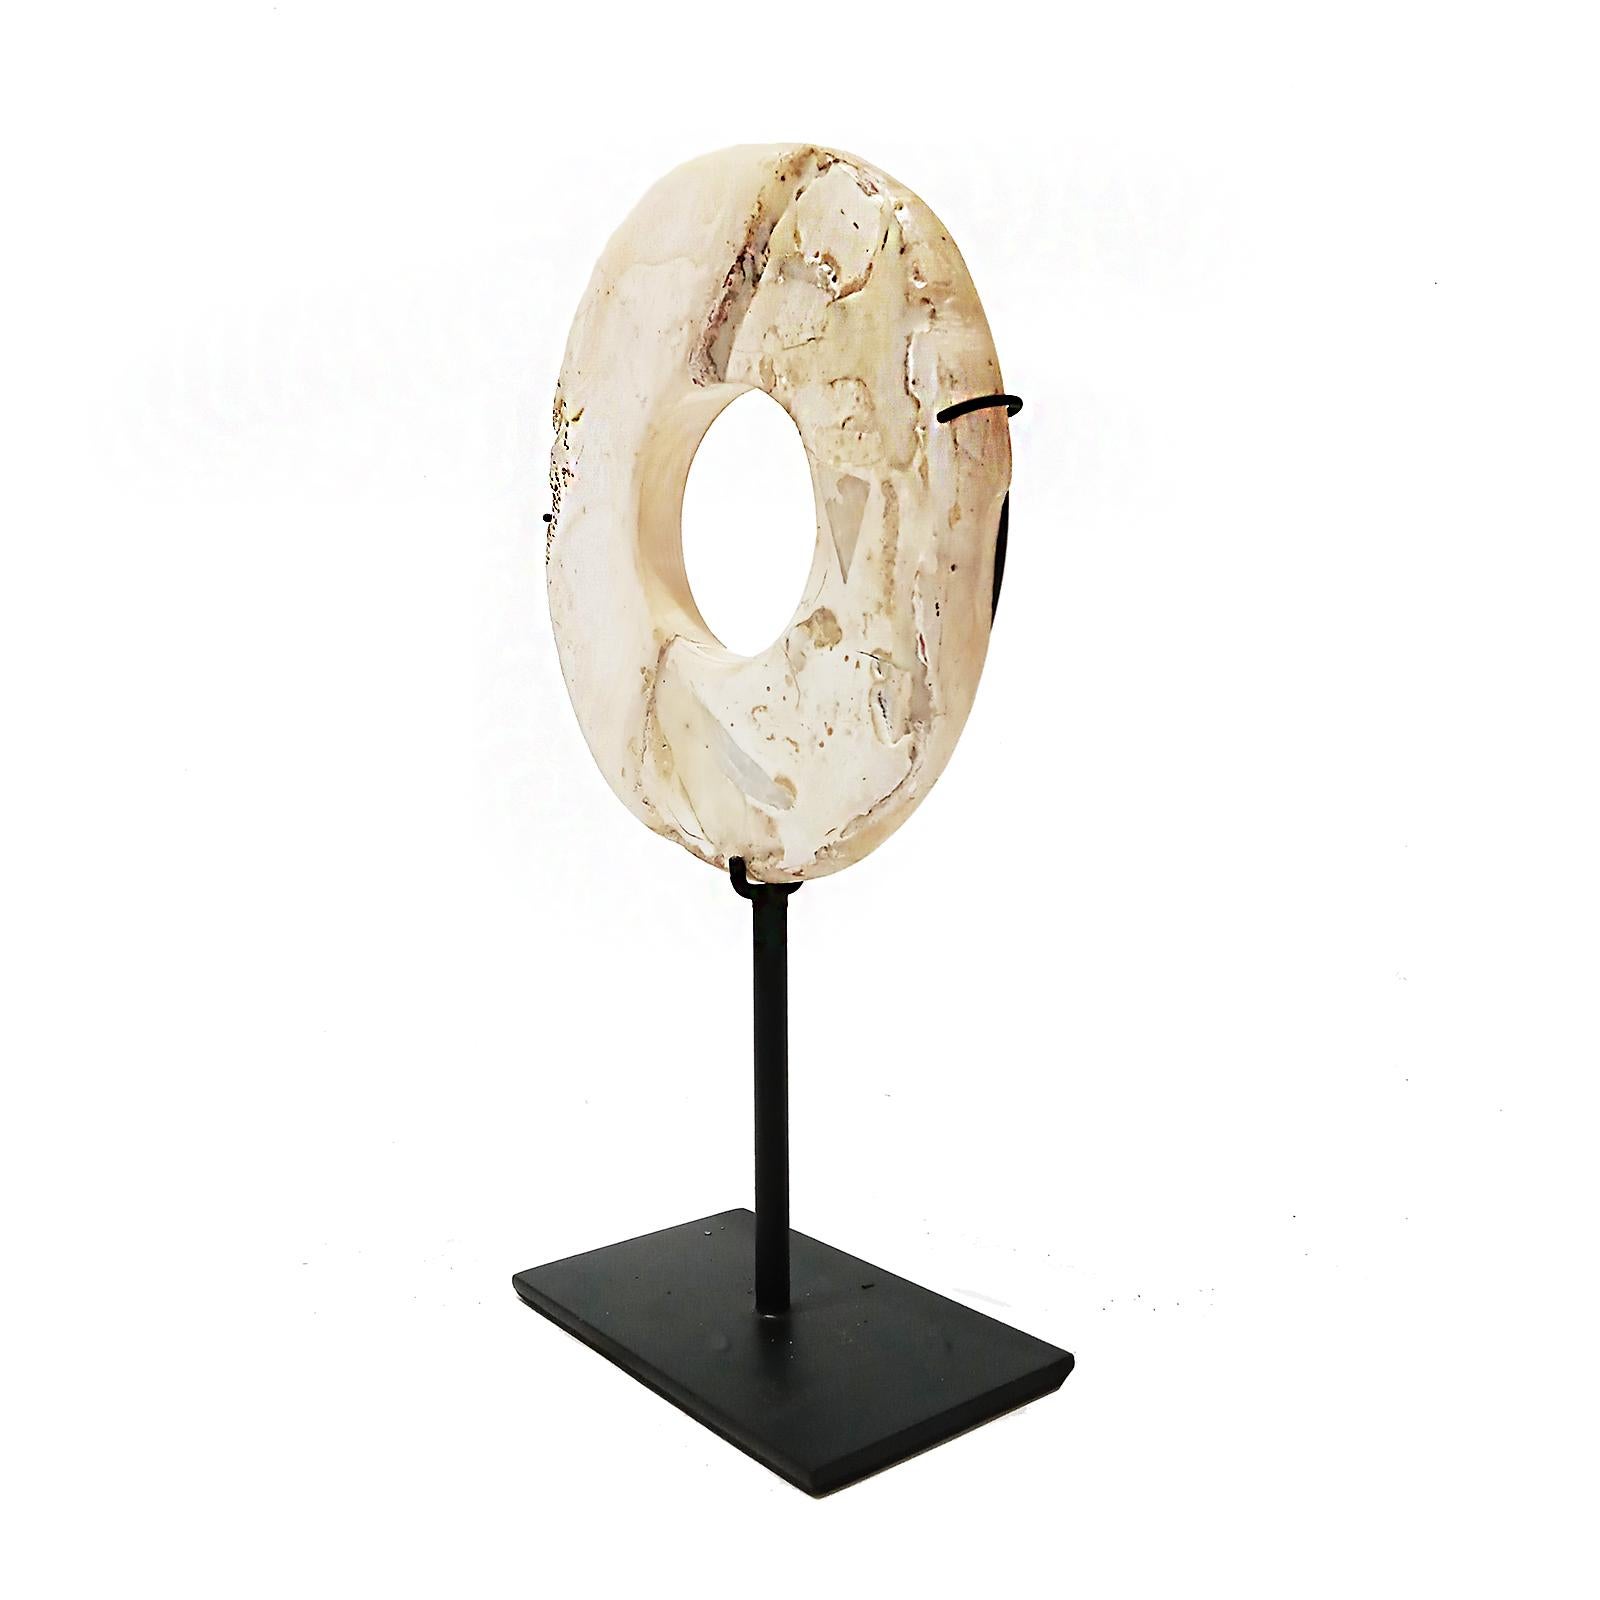 A beautiful stone disk, hand-carved in Indonesia. Mounted on a black metal stand. Cream-colored stone, polished to resemble marble and shaped into a disk.

7 inches diameter, 2.75 inches deep (stand base), 10 inches total height (mounted). 

Other